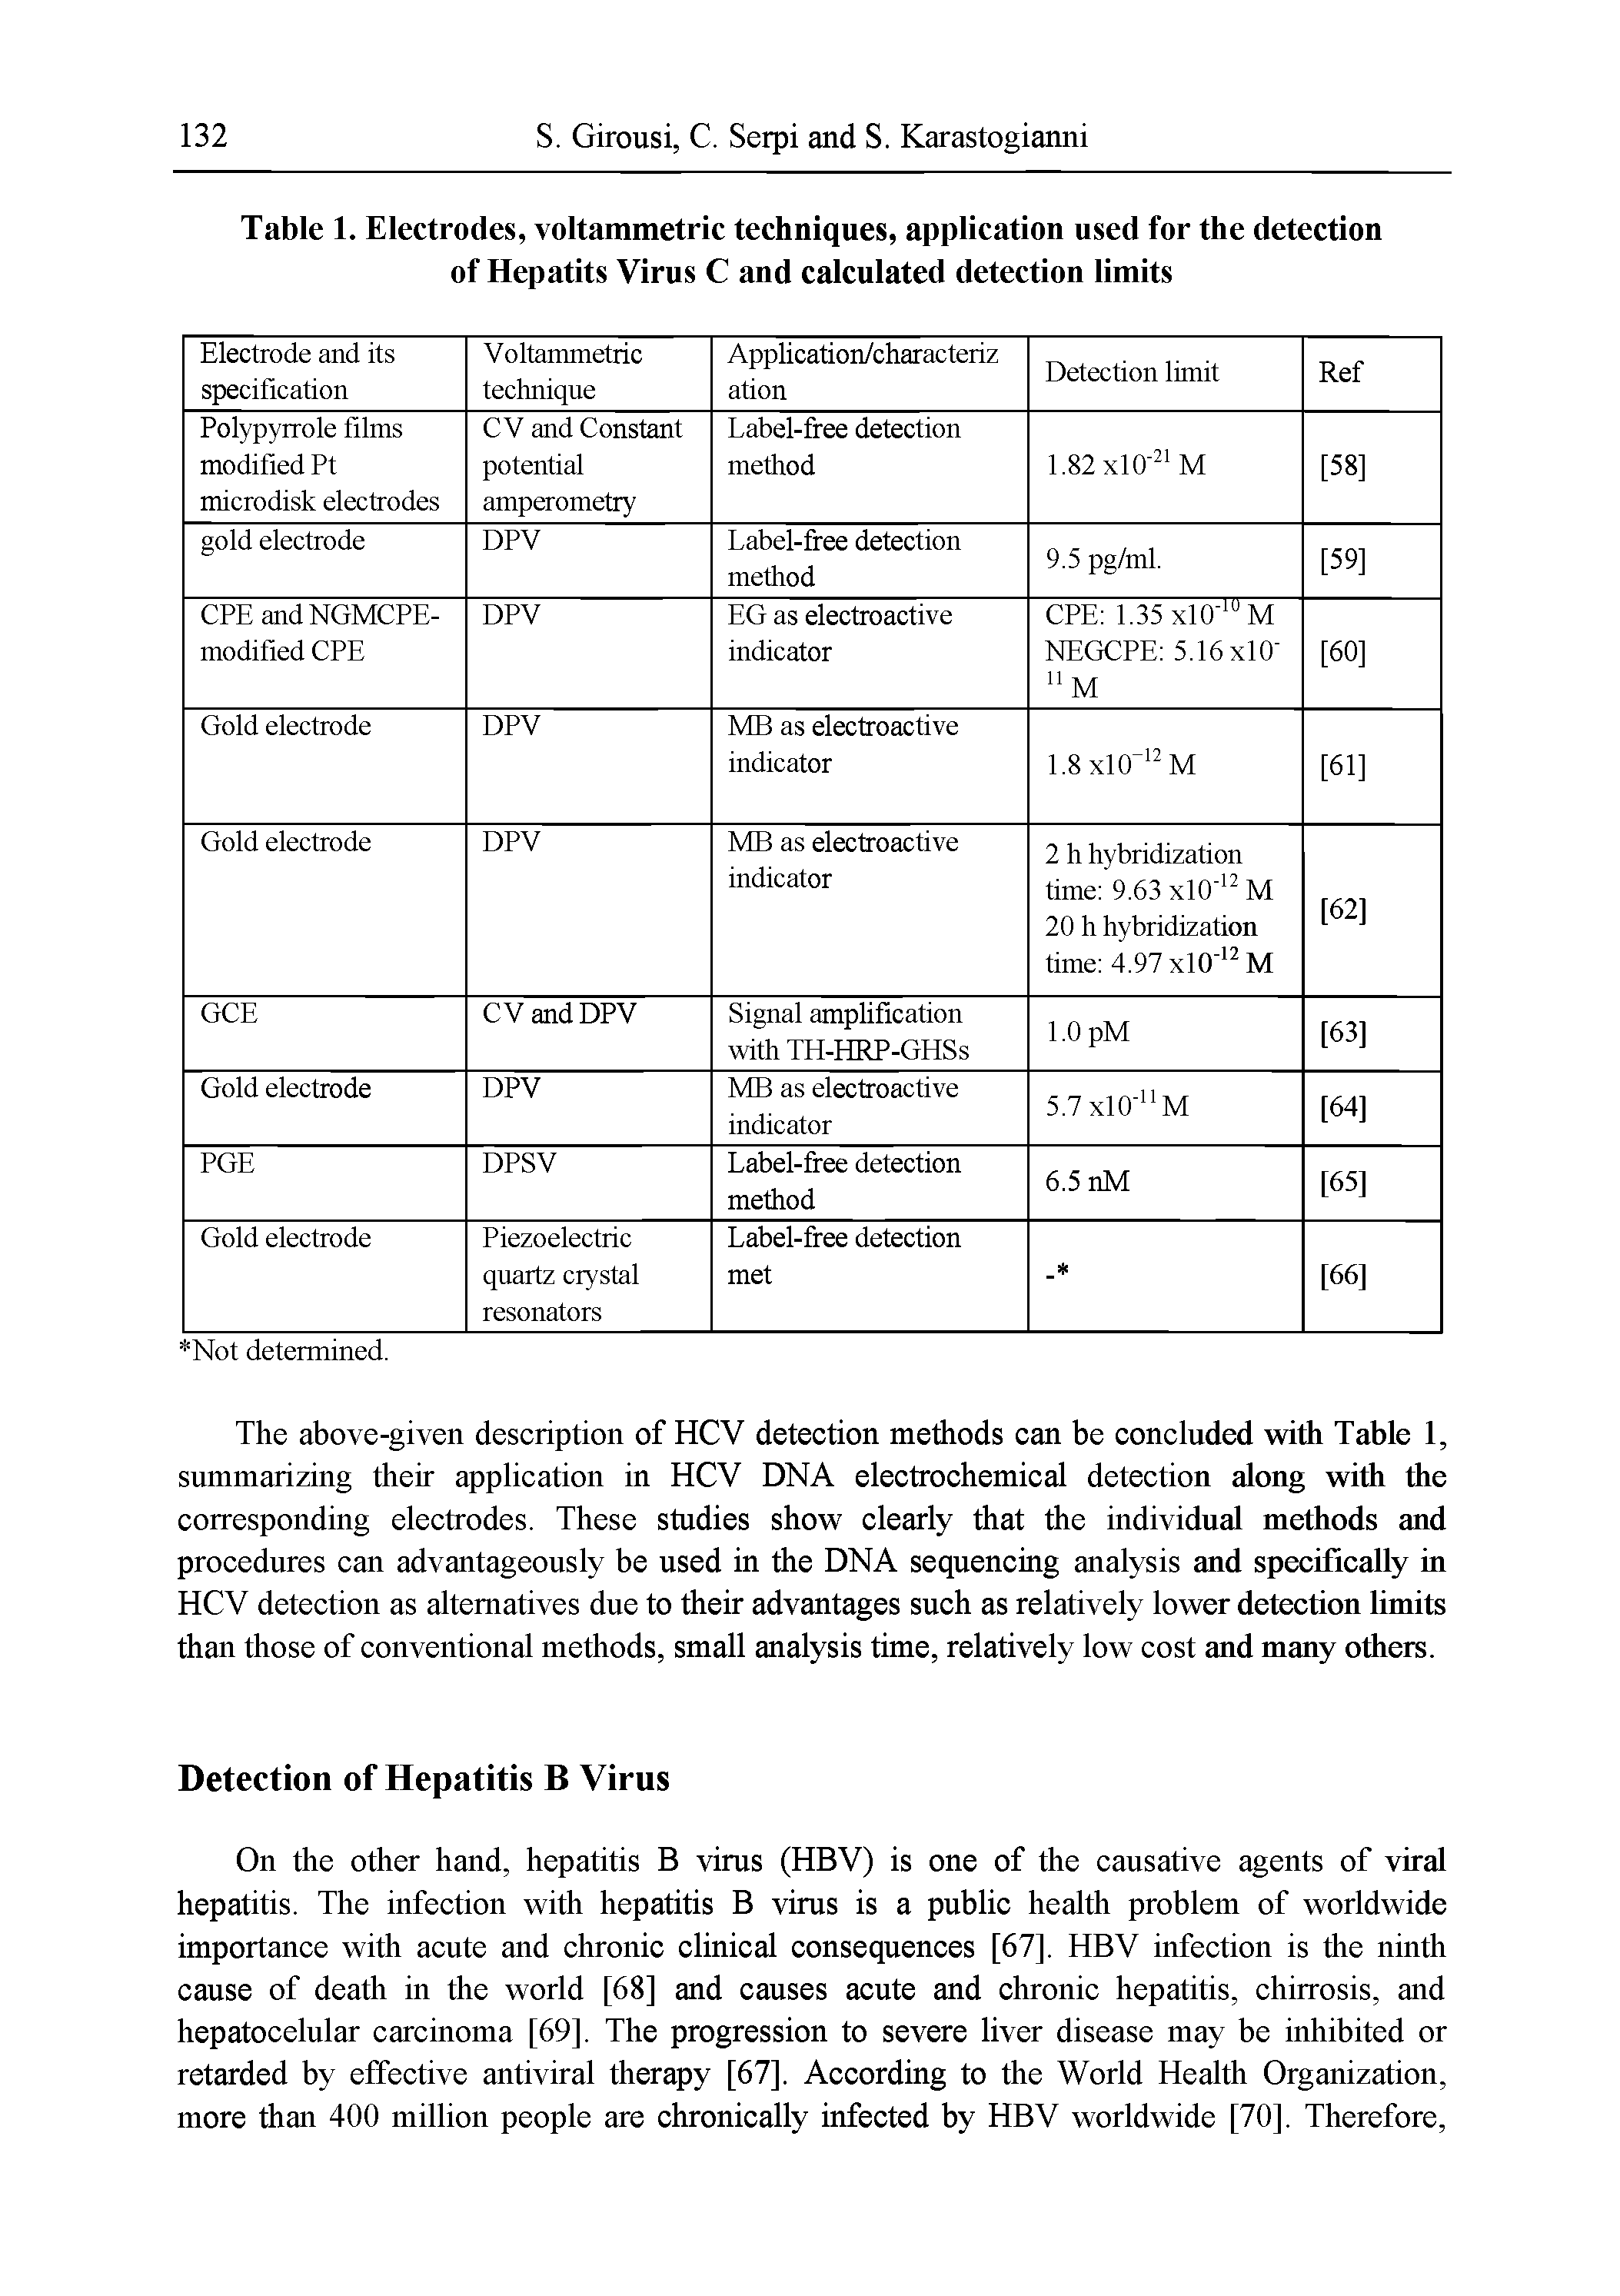 Table 1. Electrodes, voltammetric techniques, application used for the detection of Hepatits Virus C and calculated detection limits...